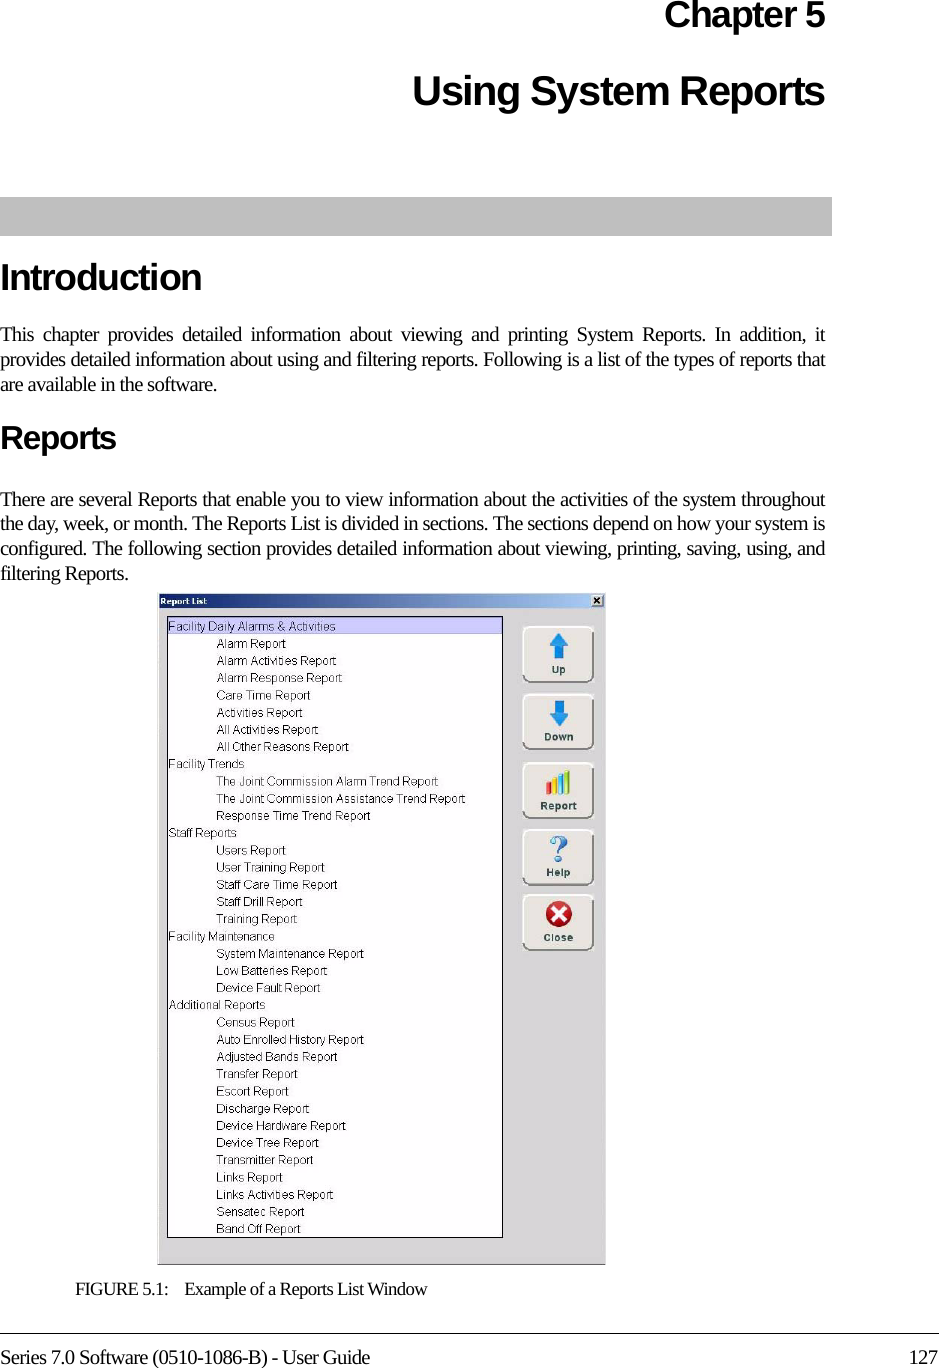 Series 7.0 Software (0510-1086-B) - User Guide 127Chapter 5Using System ReportsIntroductionThis chapter provides detailed information about viewing and printing System Reports. In addition, it provides detailed information about using and filtering reports. Following is a list of the types of reports that are available in the software.ReportsThere are several Reports that enable you to view information about the activities of the system throughout the day, week, or month. The Reports List is divided in sections. The sections depend on how your system is configured. The following section provides detailed information about viewing, printing, saving, using, and filtering Reports.FIGURE 5.1:    Example of a Reports List Window